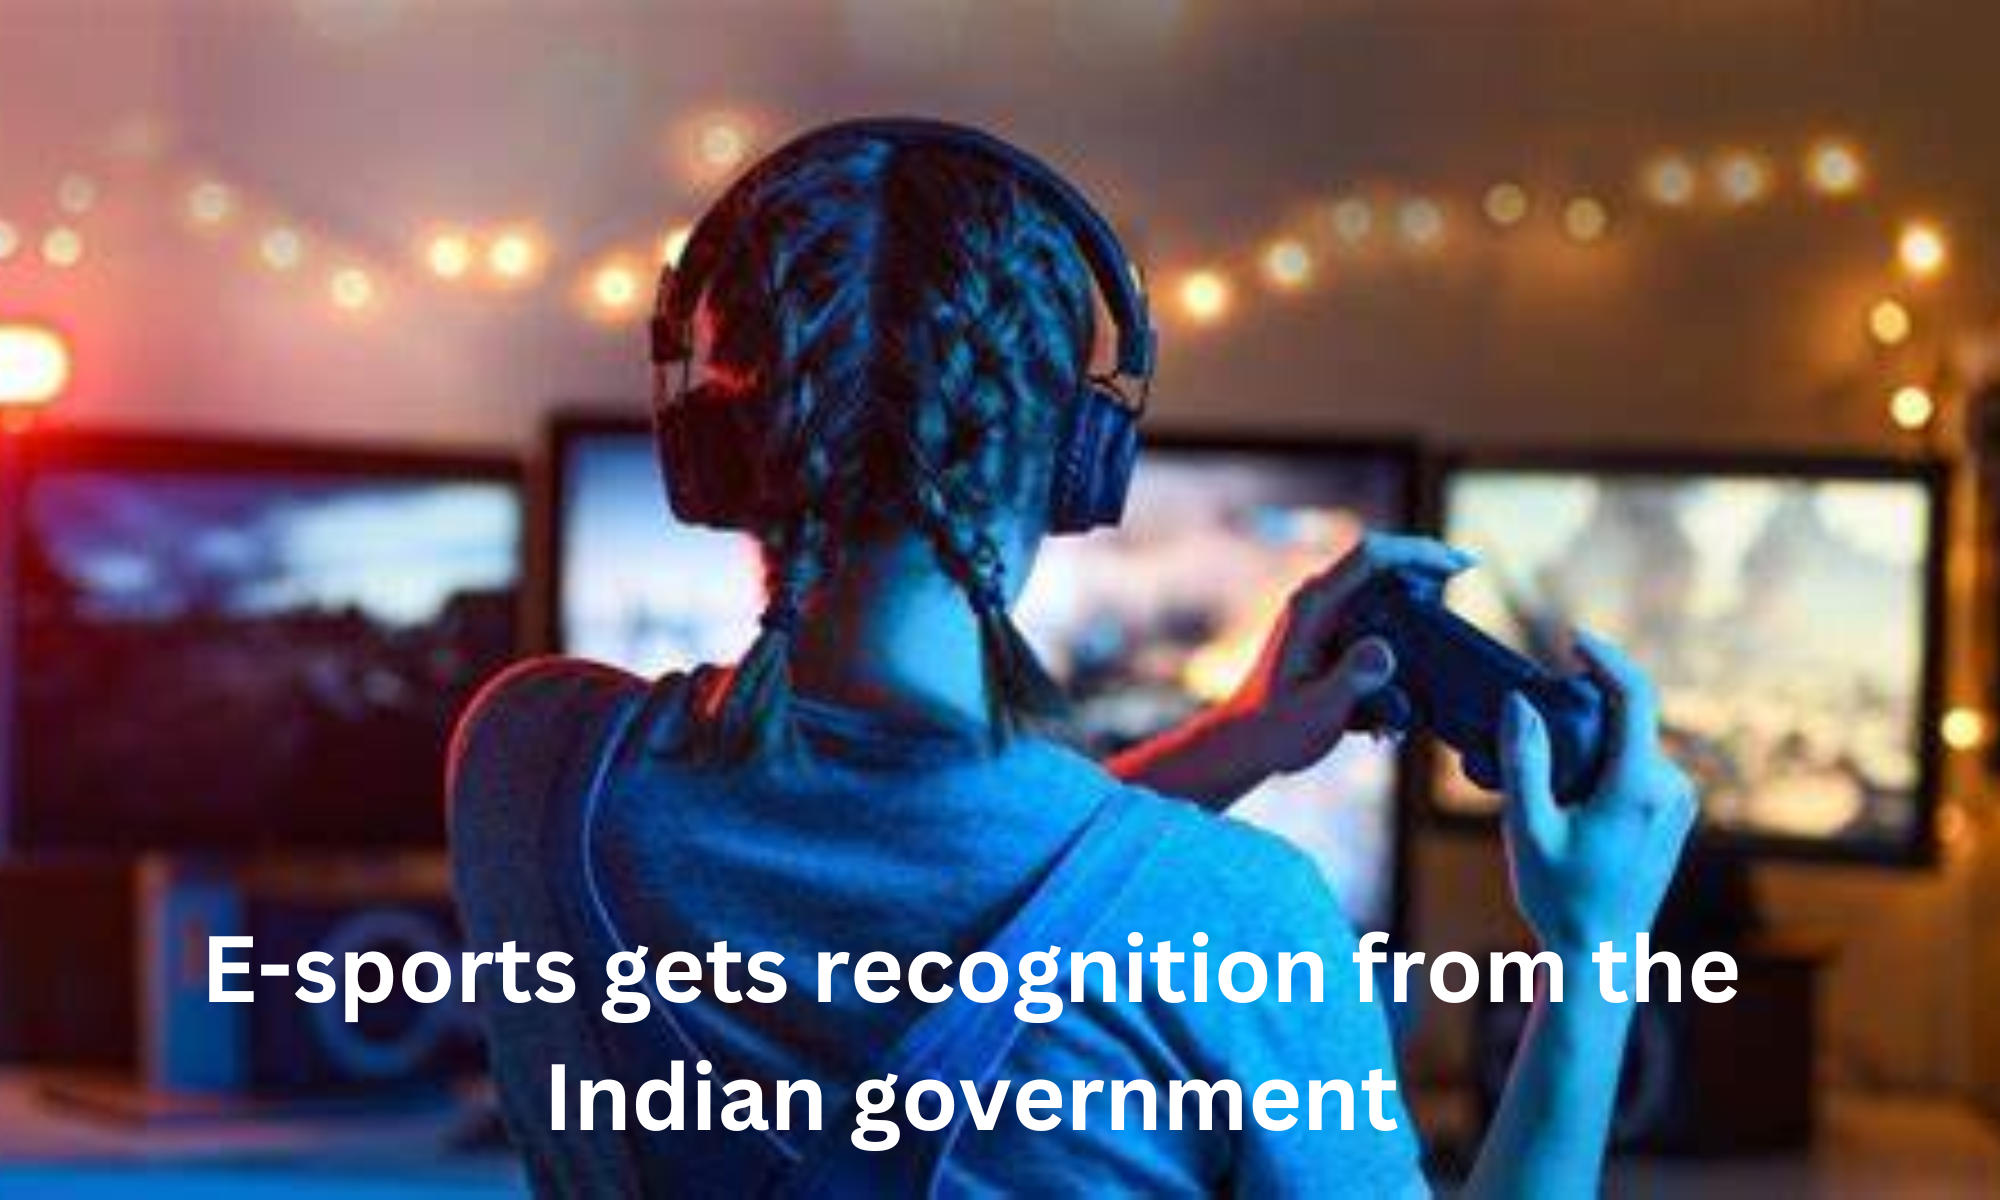 E-sports gets recognition from the Indian government as part of multisports events_40.1